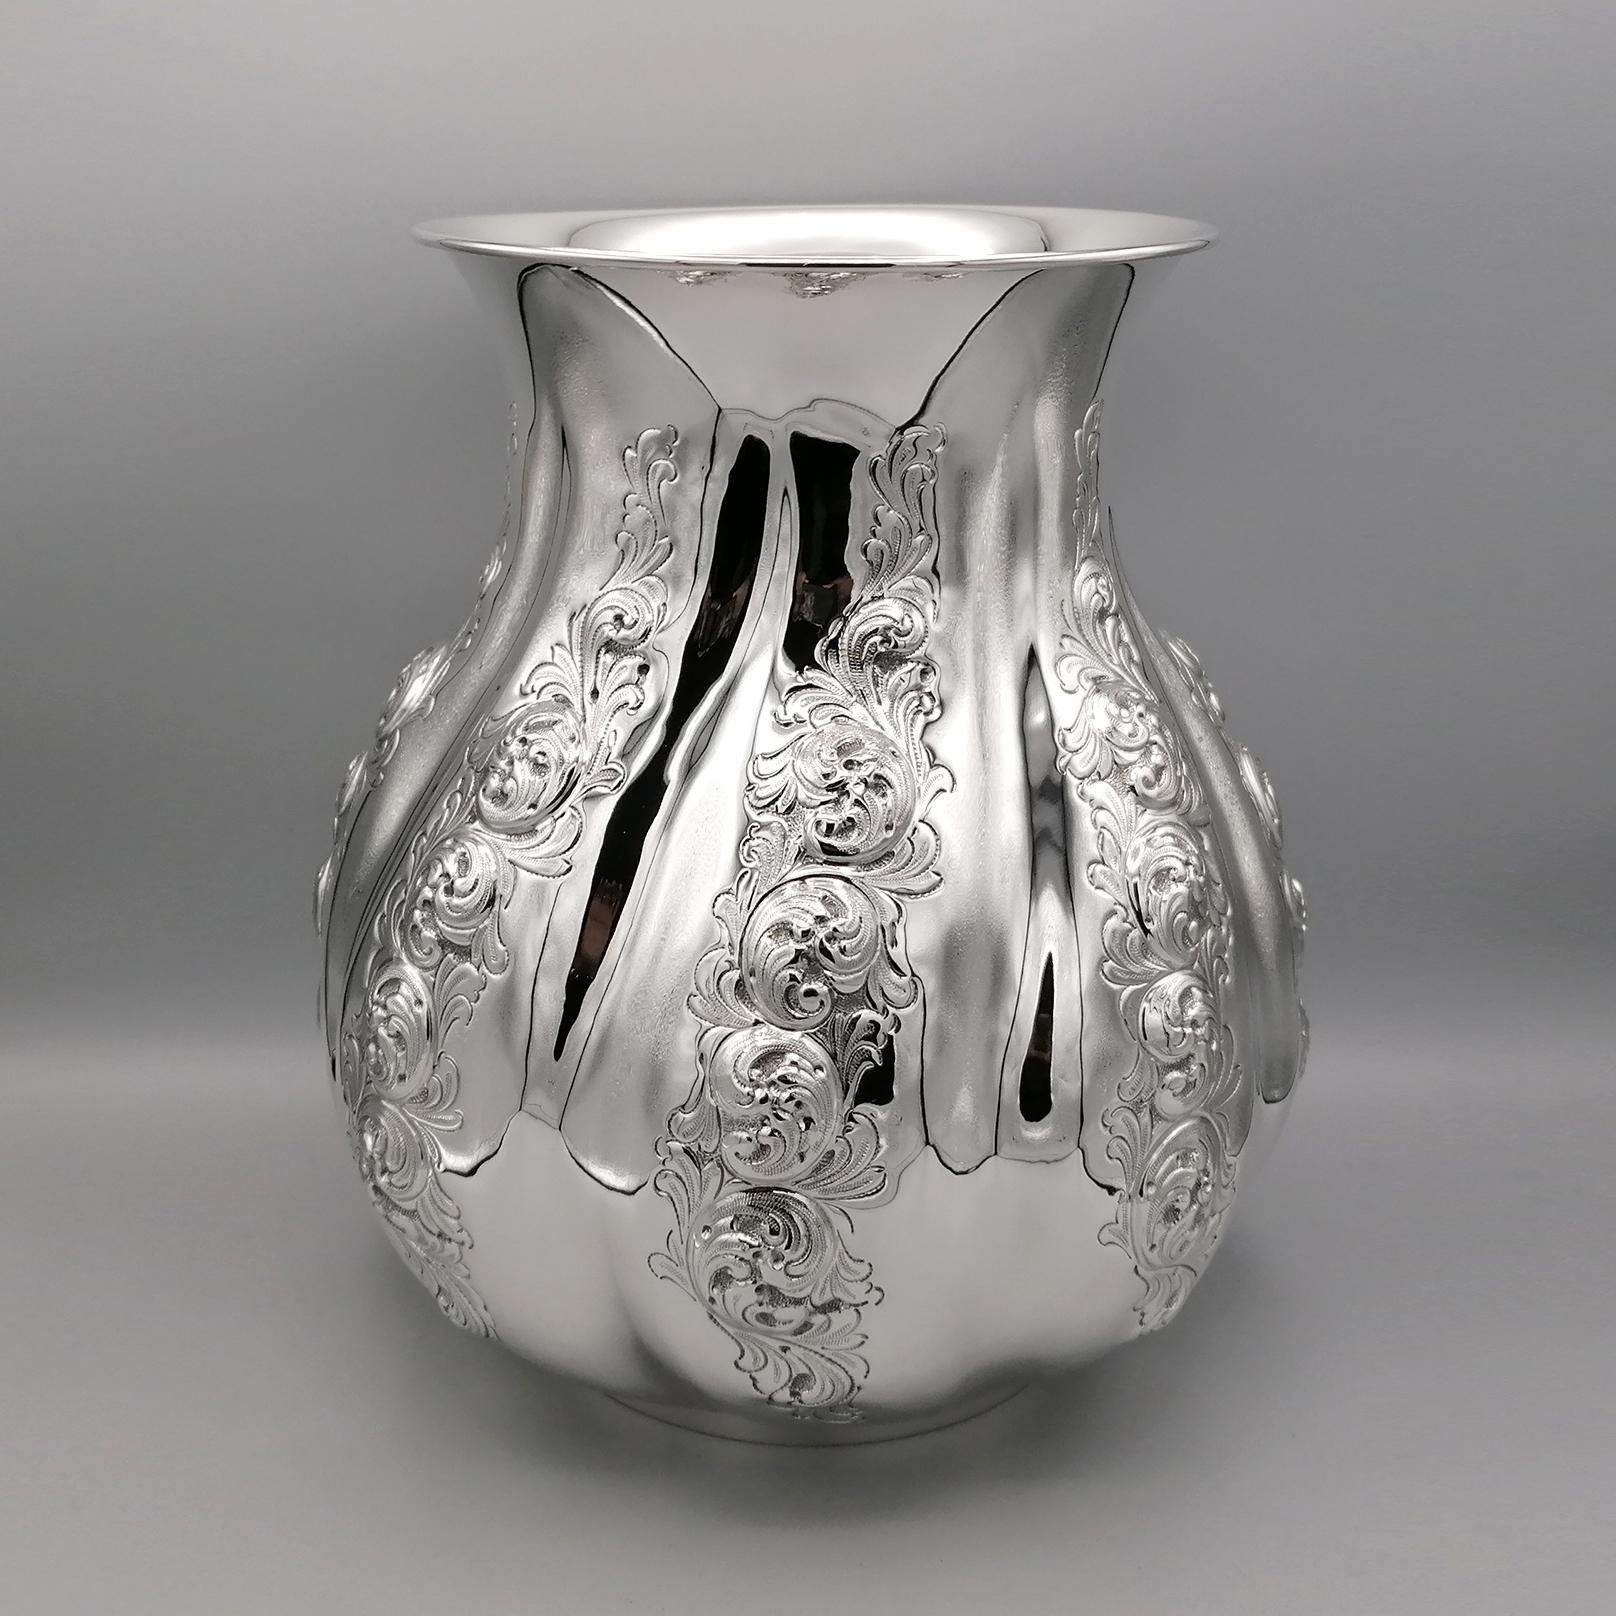 Italian vase from the 21st century. The body of the vase is round, pot-bellied and worked with the embossed and chisel technique.
The volute design, typical of the Italian Baroque, has been embossed on torchon grooves making the structure of the